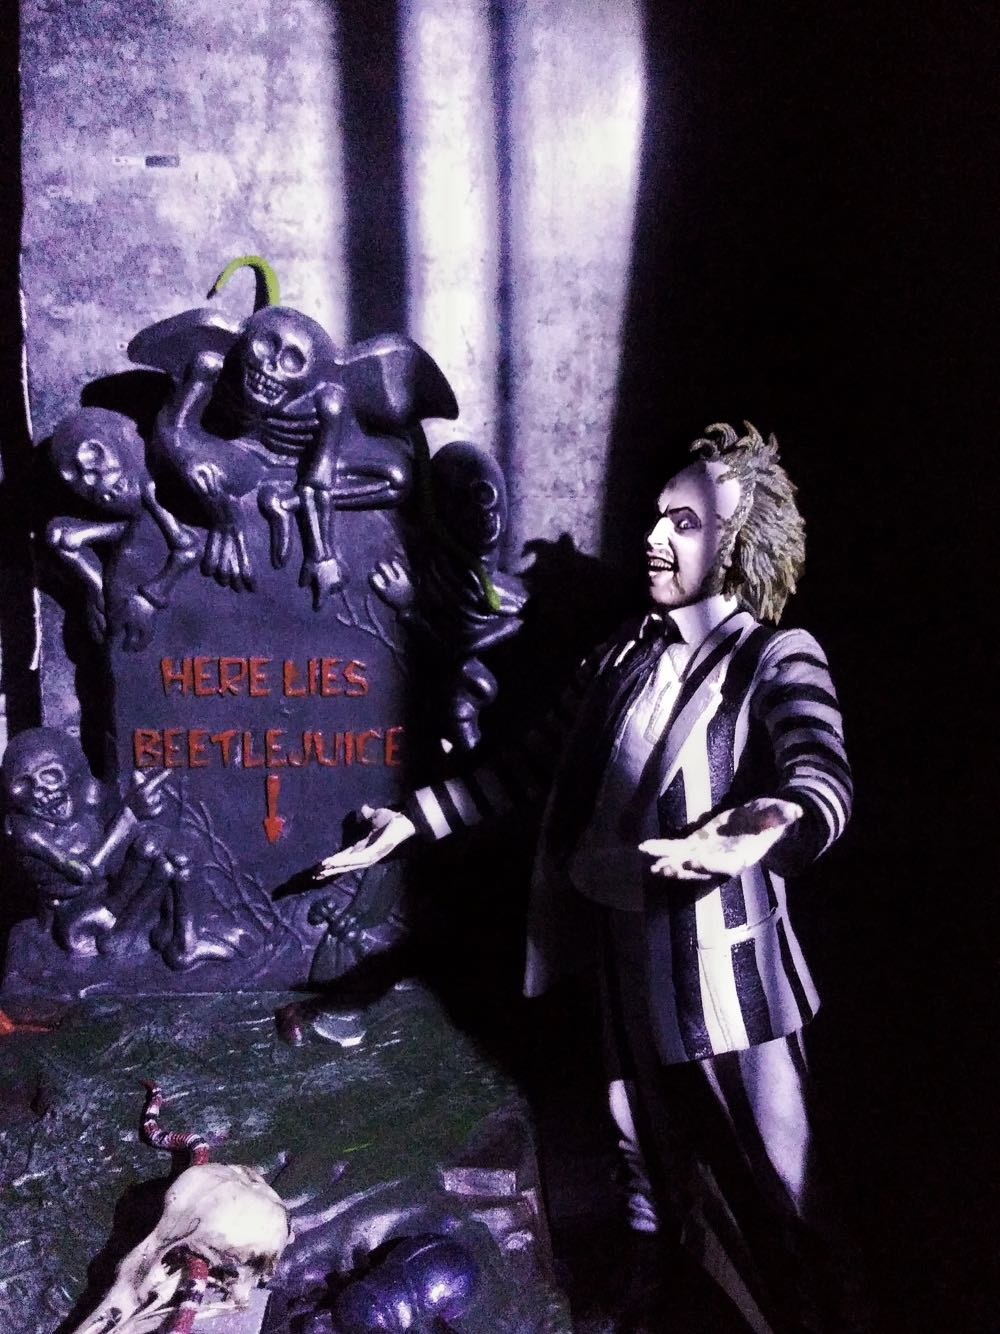 Betleejuice - Neca Reel Toys (Cult Classics) action figure collectible [Barcode 634482607107] - Main Image 4